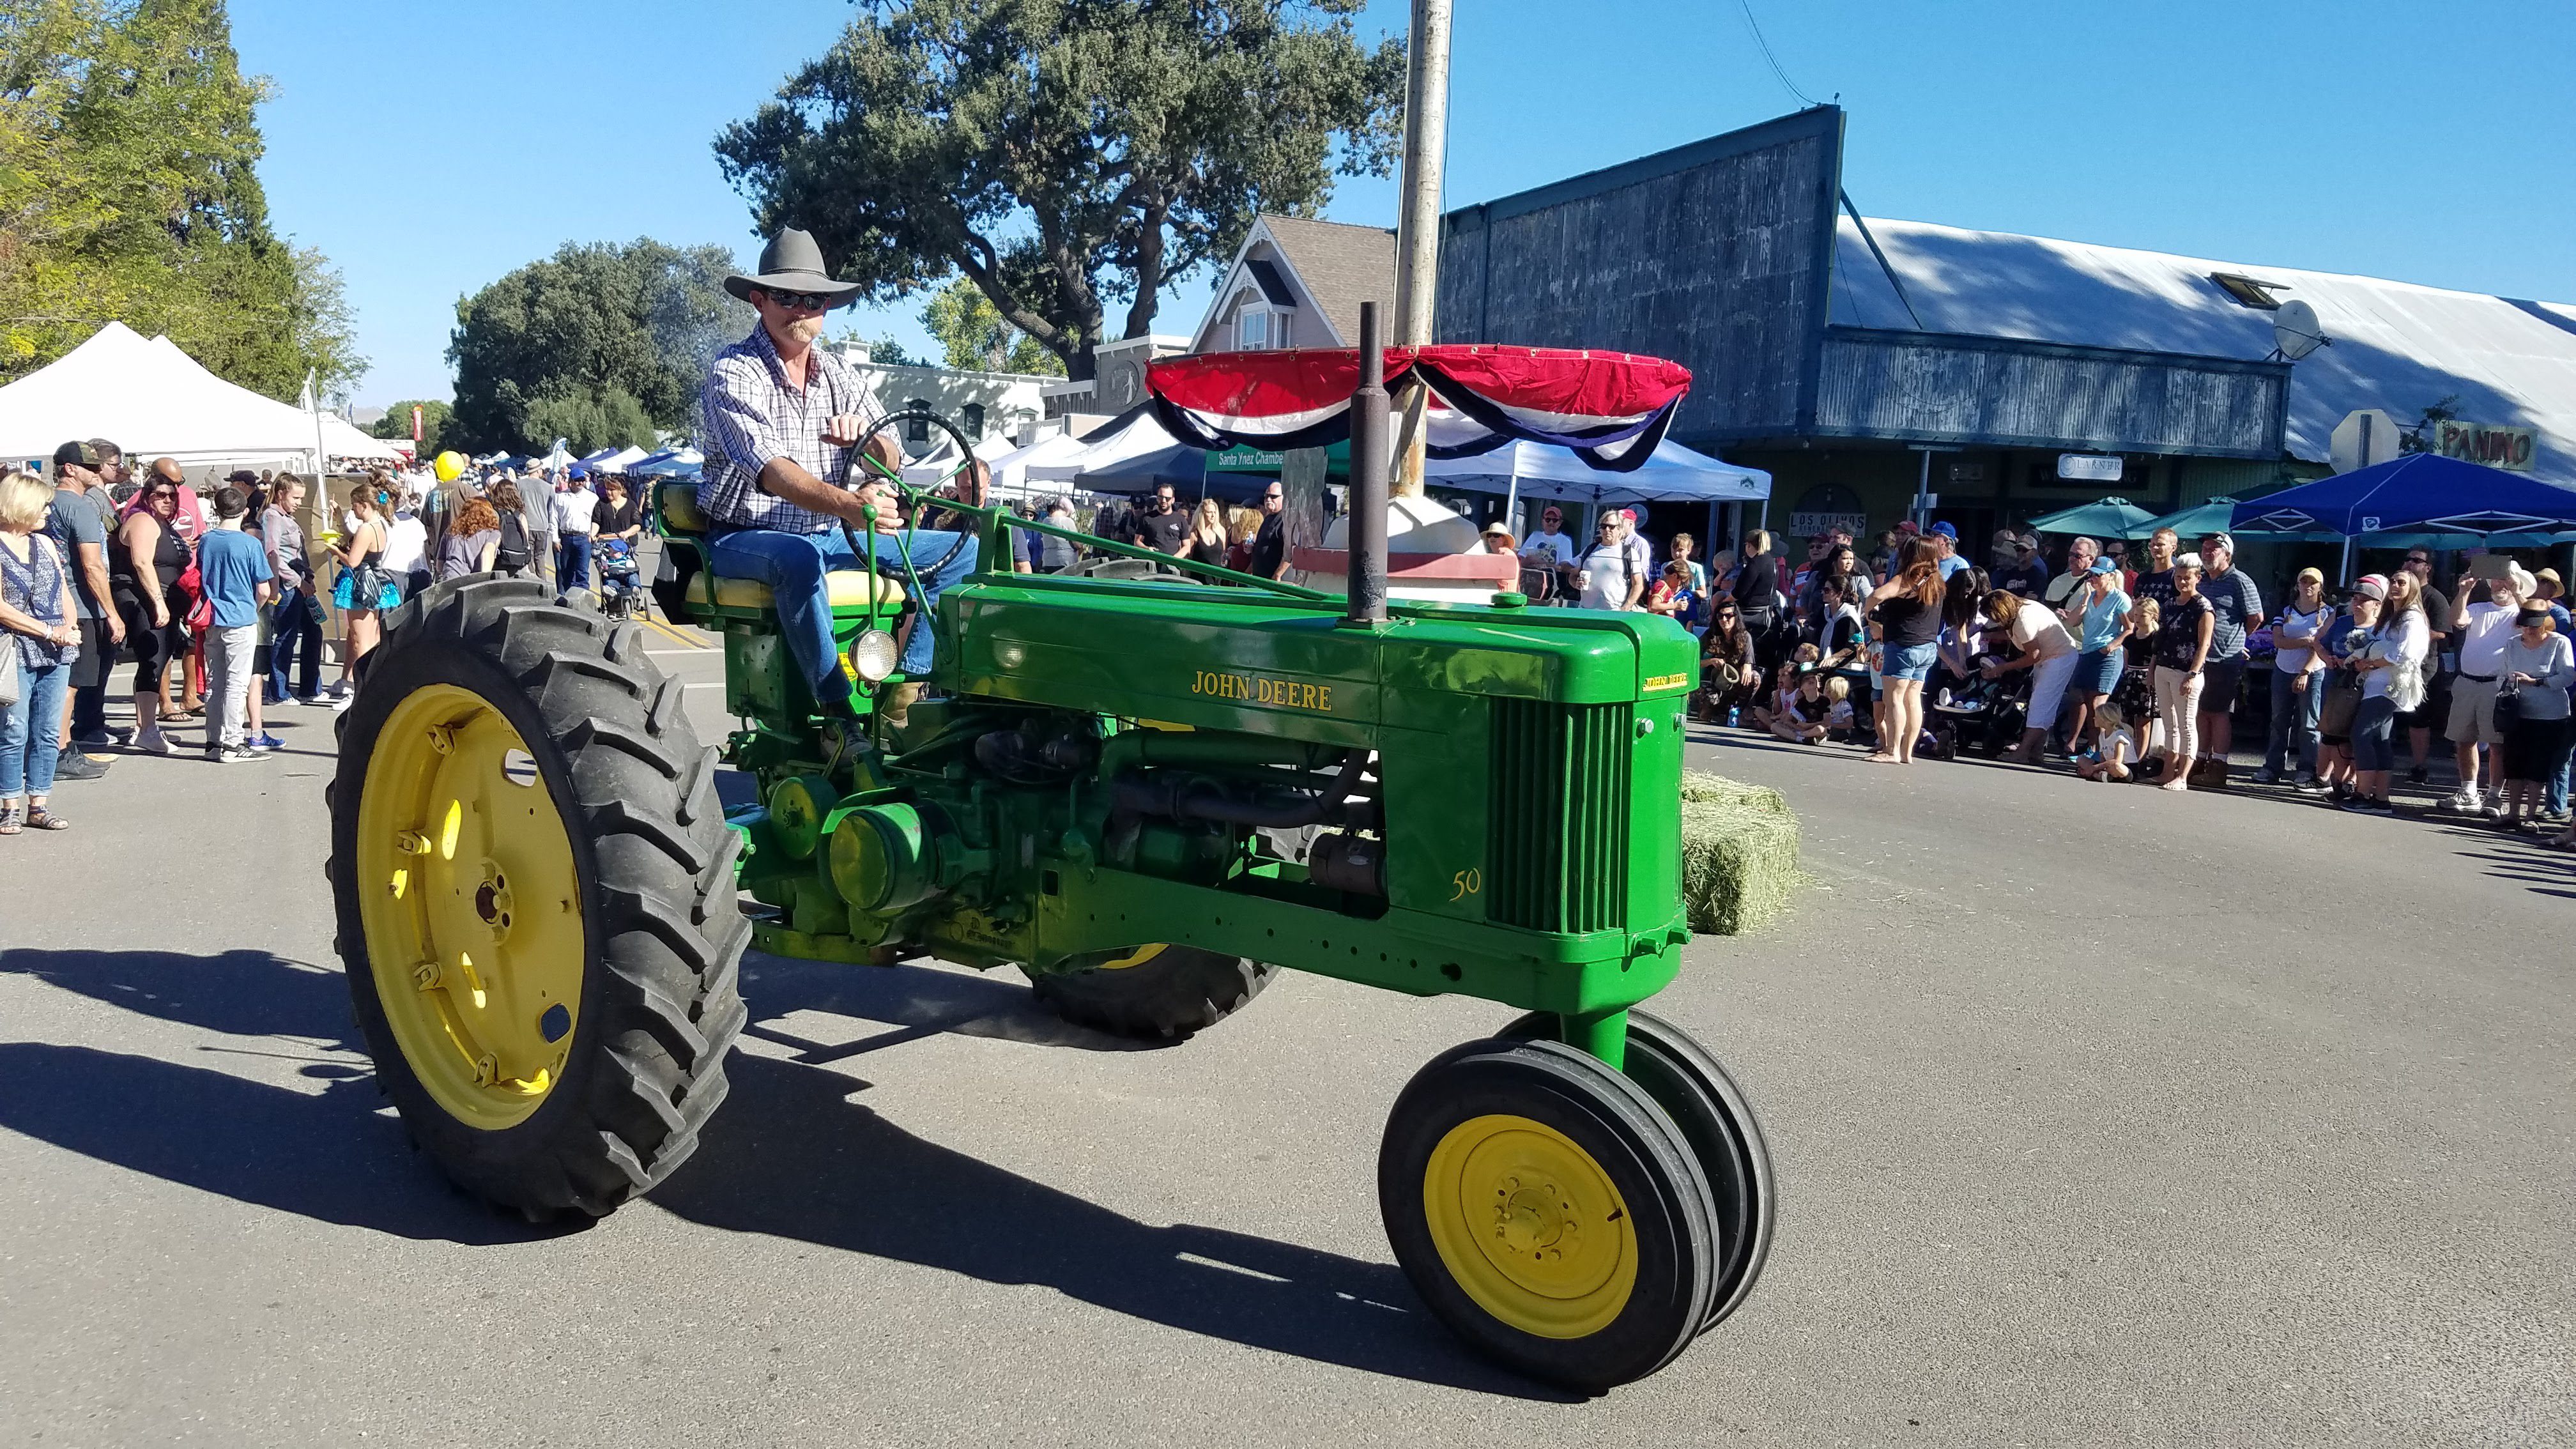 Day in the Country brings festivities to Los Olivos